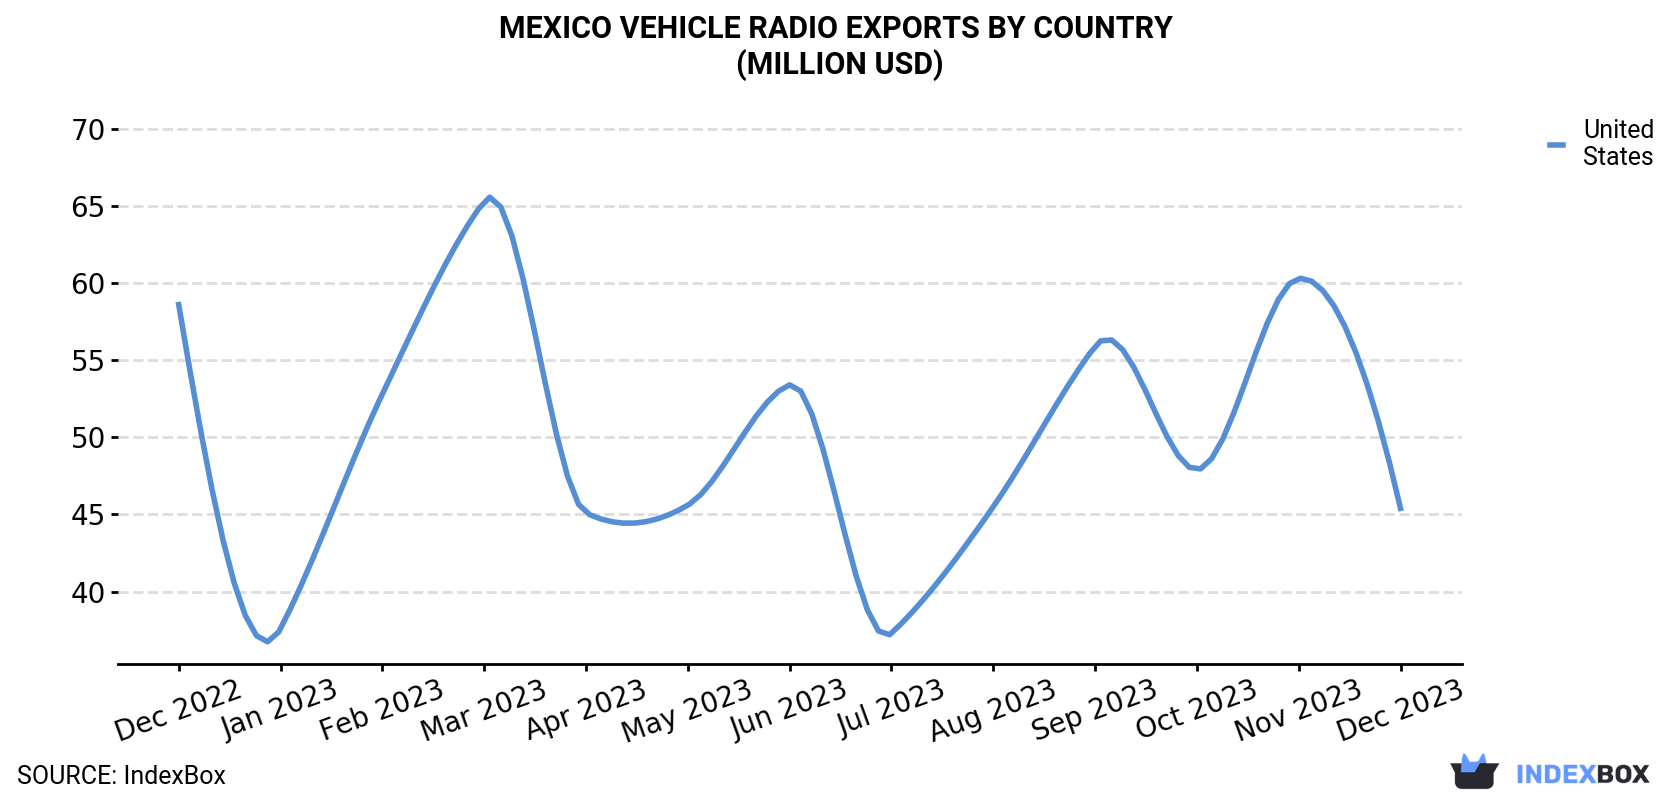 Mexico Vehicle Radio Exports By Country (Million USD)